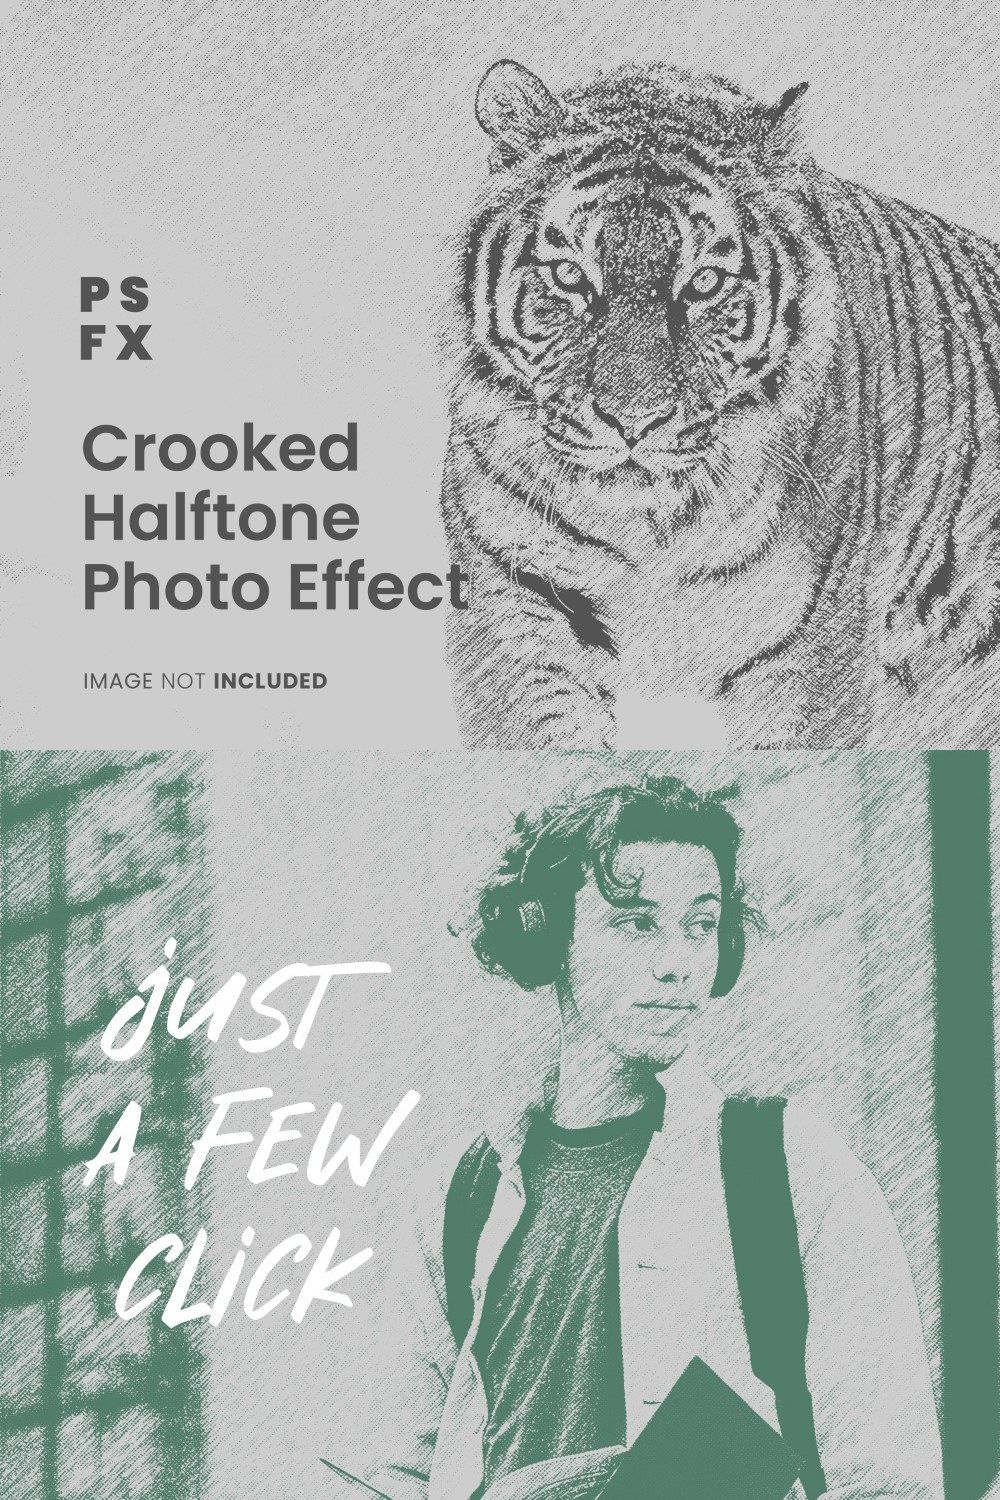 Crocked Halftone photo Effect Psd pinterest preview image.